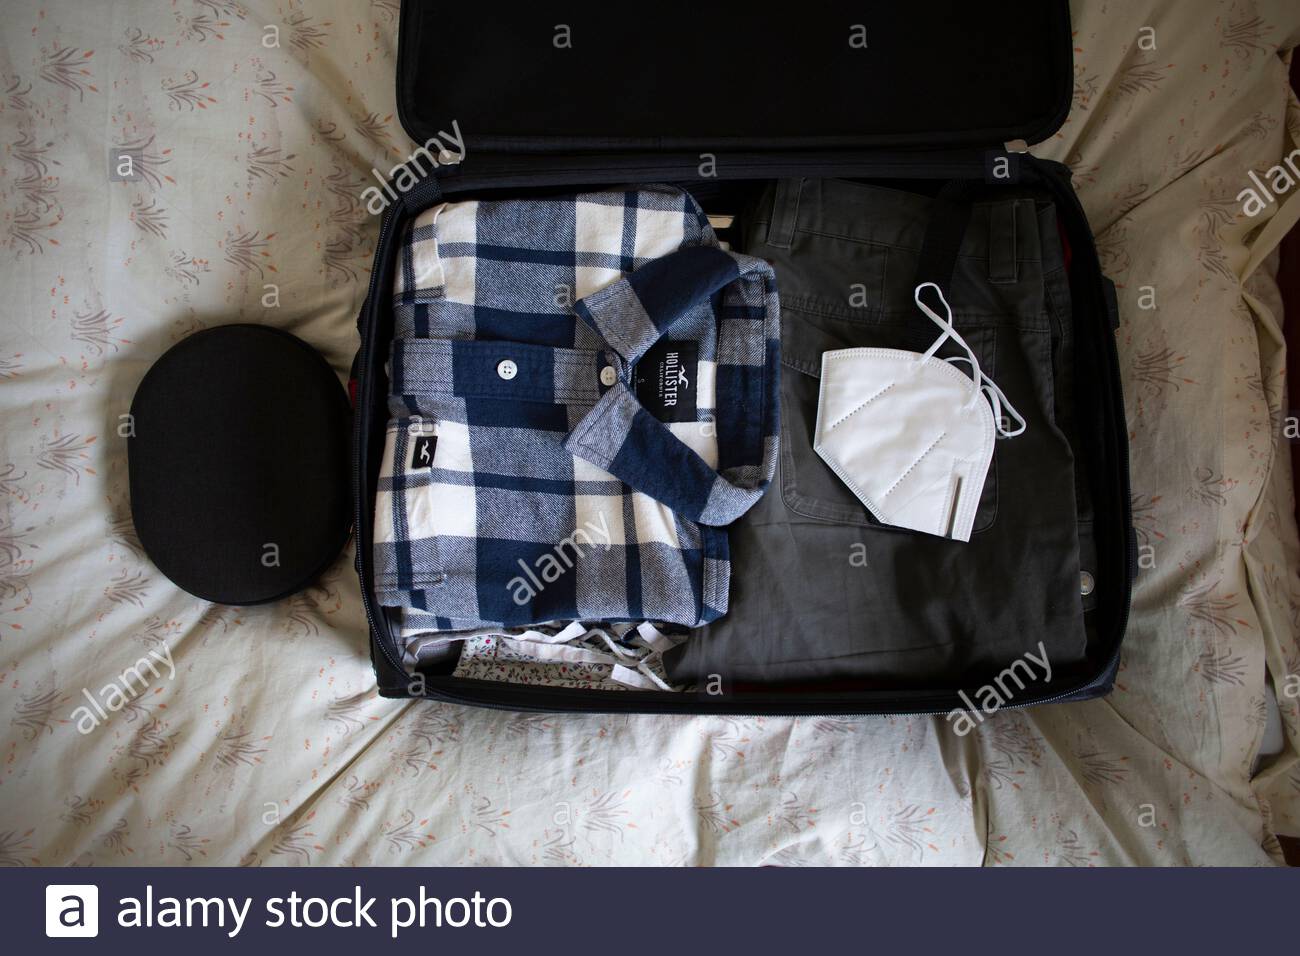 A person's travel bag open and packed on a bed before departure with a shirt and a white anti-Covid19 mask prominent in the picture. Stock Photo